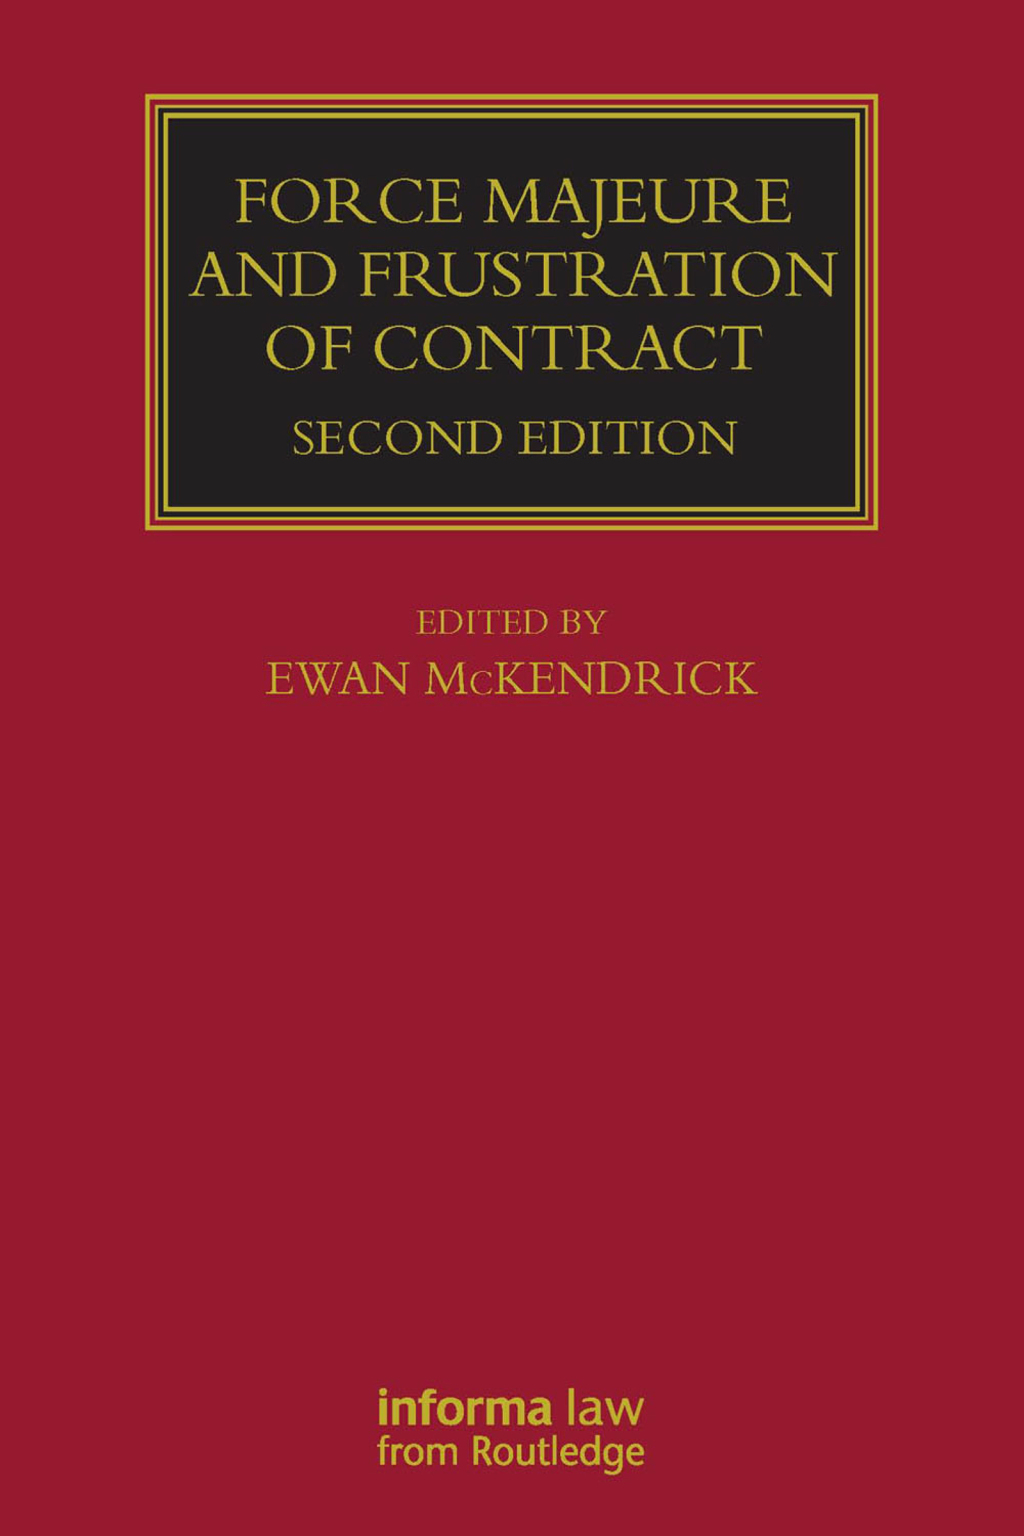 Force Majeure and Frustration of Contract - 2nd Edition (eBook Rental)